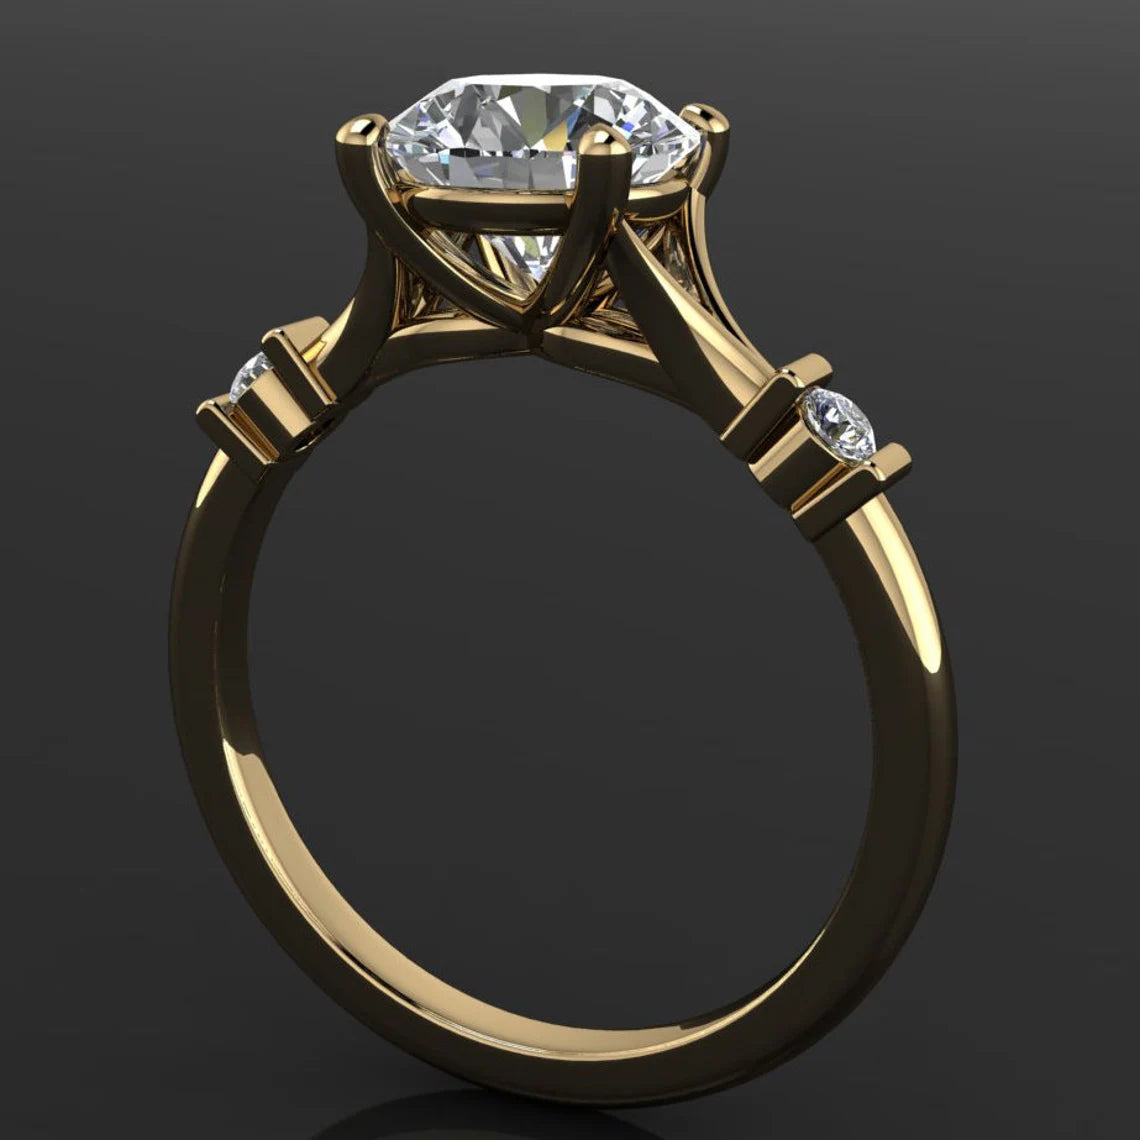 beckett ring - 1.5 carat round NEO moissanite and diamond engagement ring - J Hollywood Designs